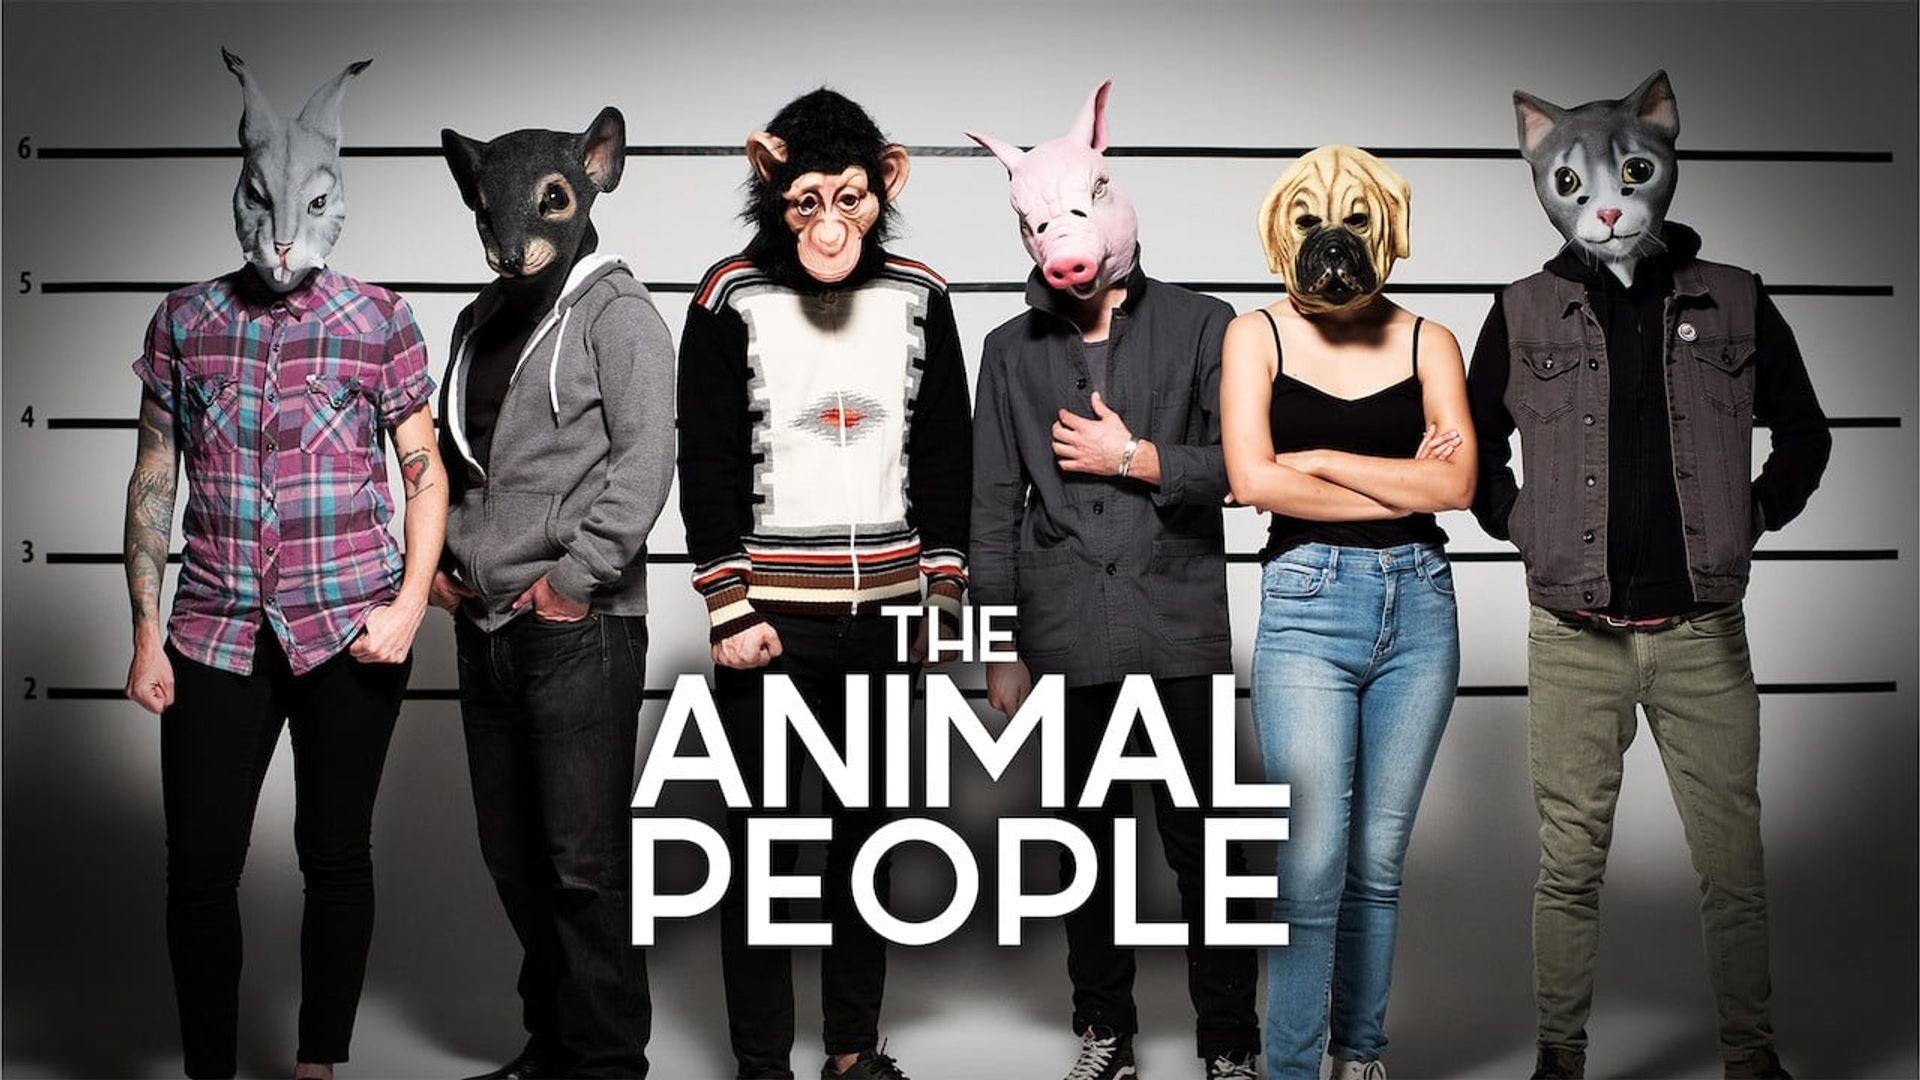 The Animal People background